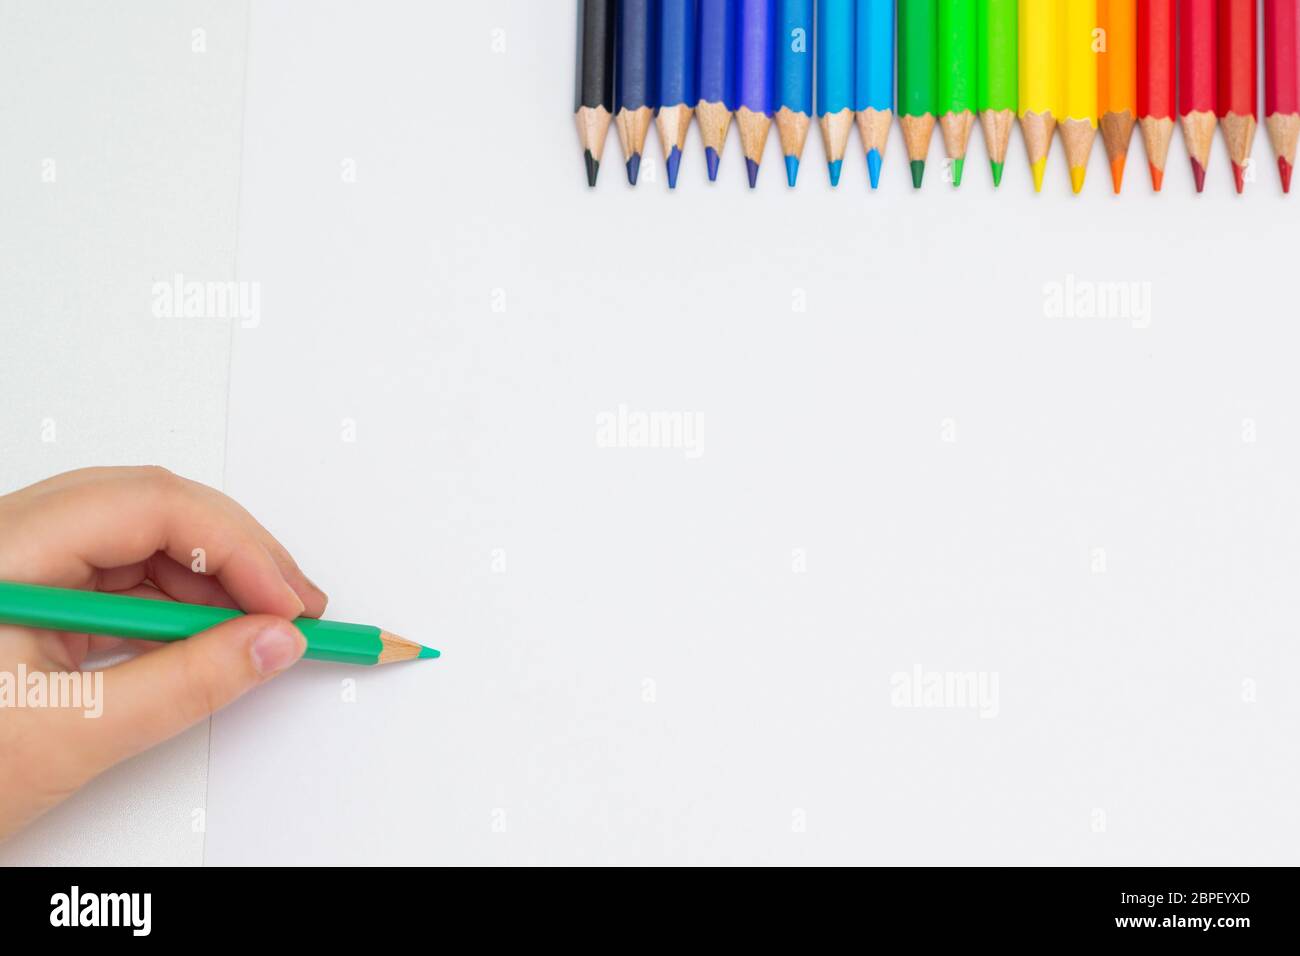 https://c8.alamy.com/comp/2BPEYXD/top-view-of-babys-hand-drawing-with-green-pencil-on-white-paper-with-the-set-of-colour-pencils-kids-painting-concept-copy-space-for-text-mockup-2BPEYXD.jpg